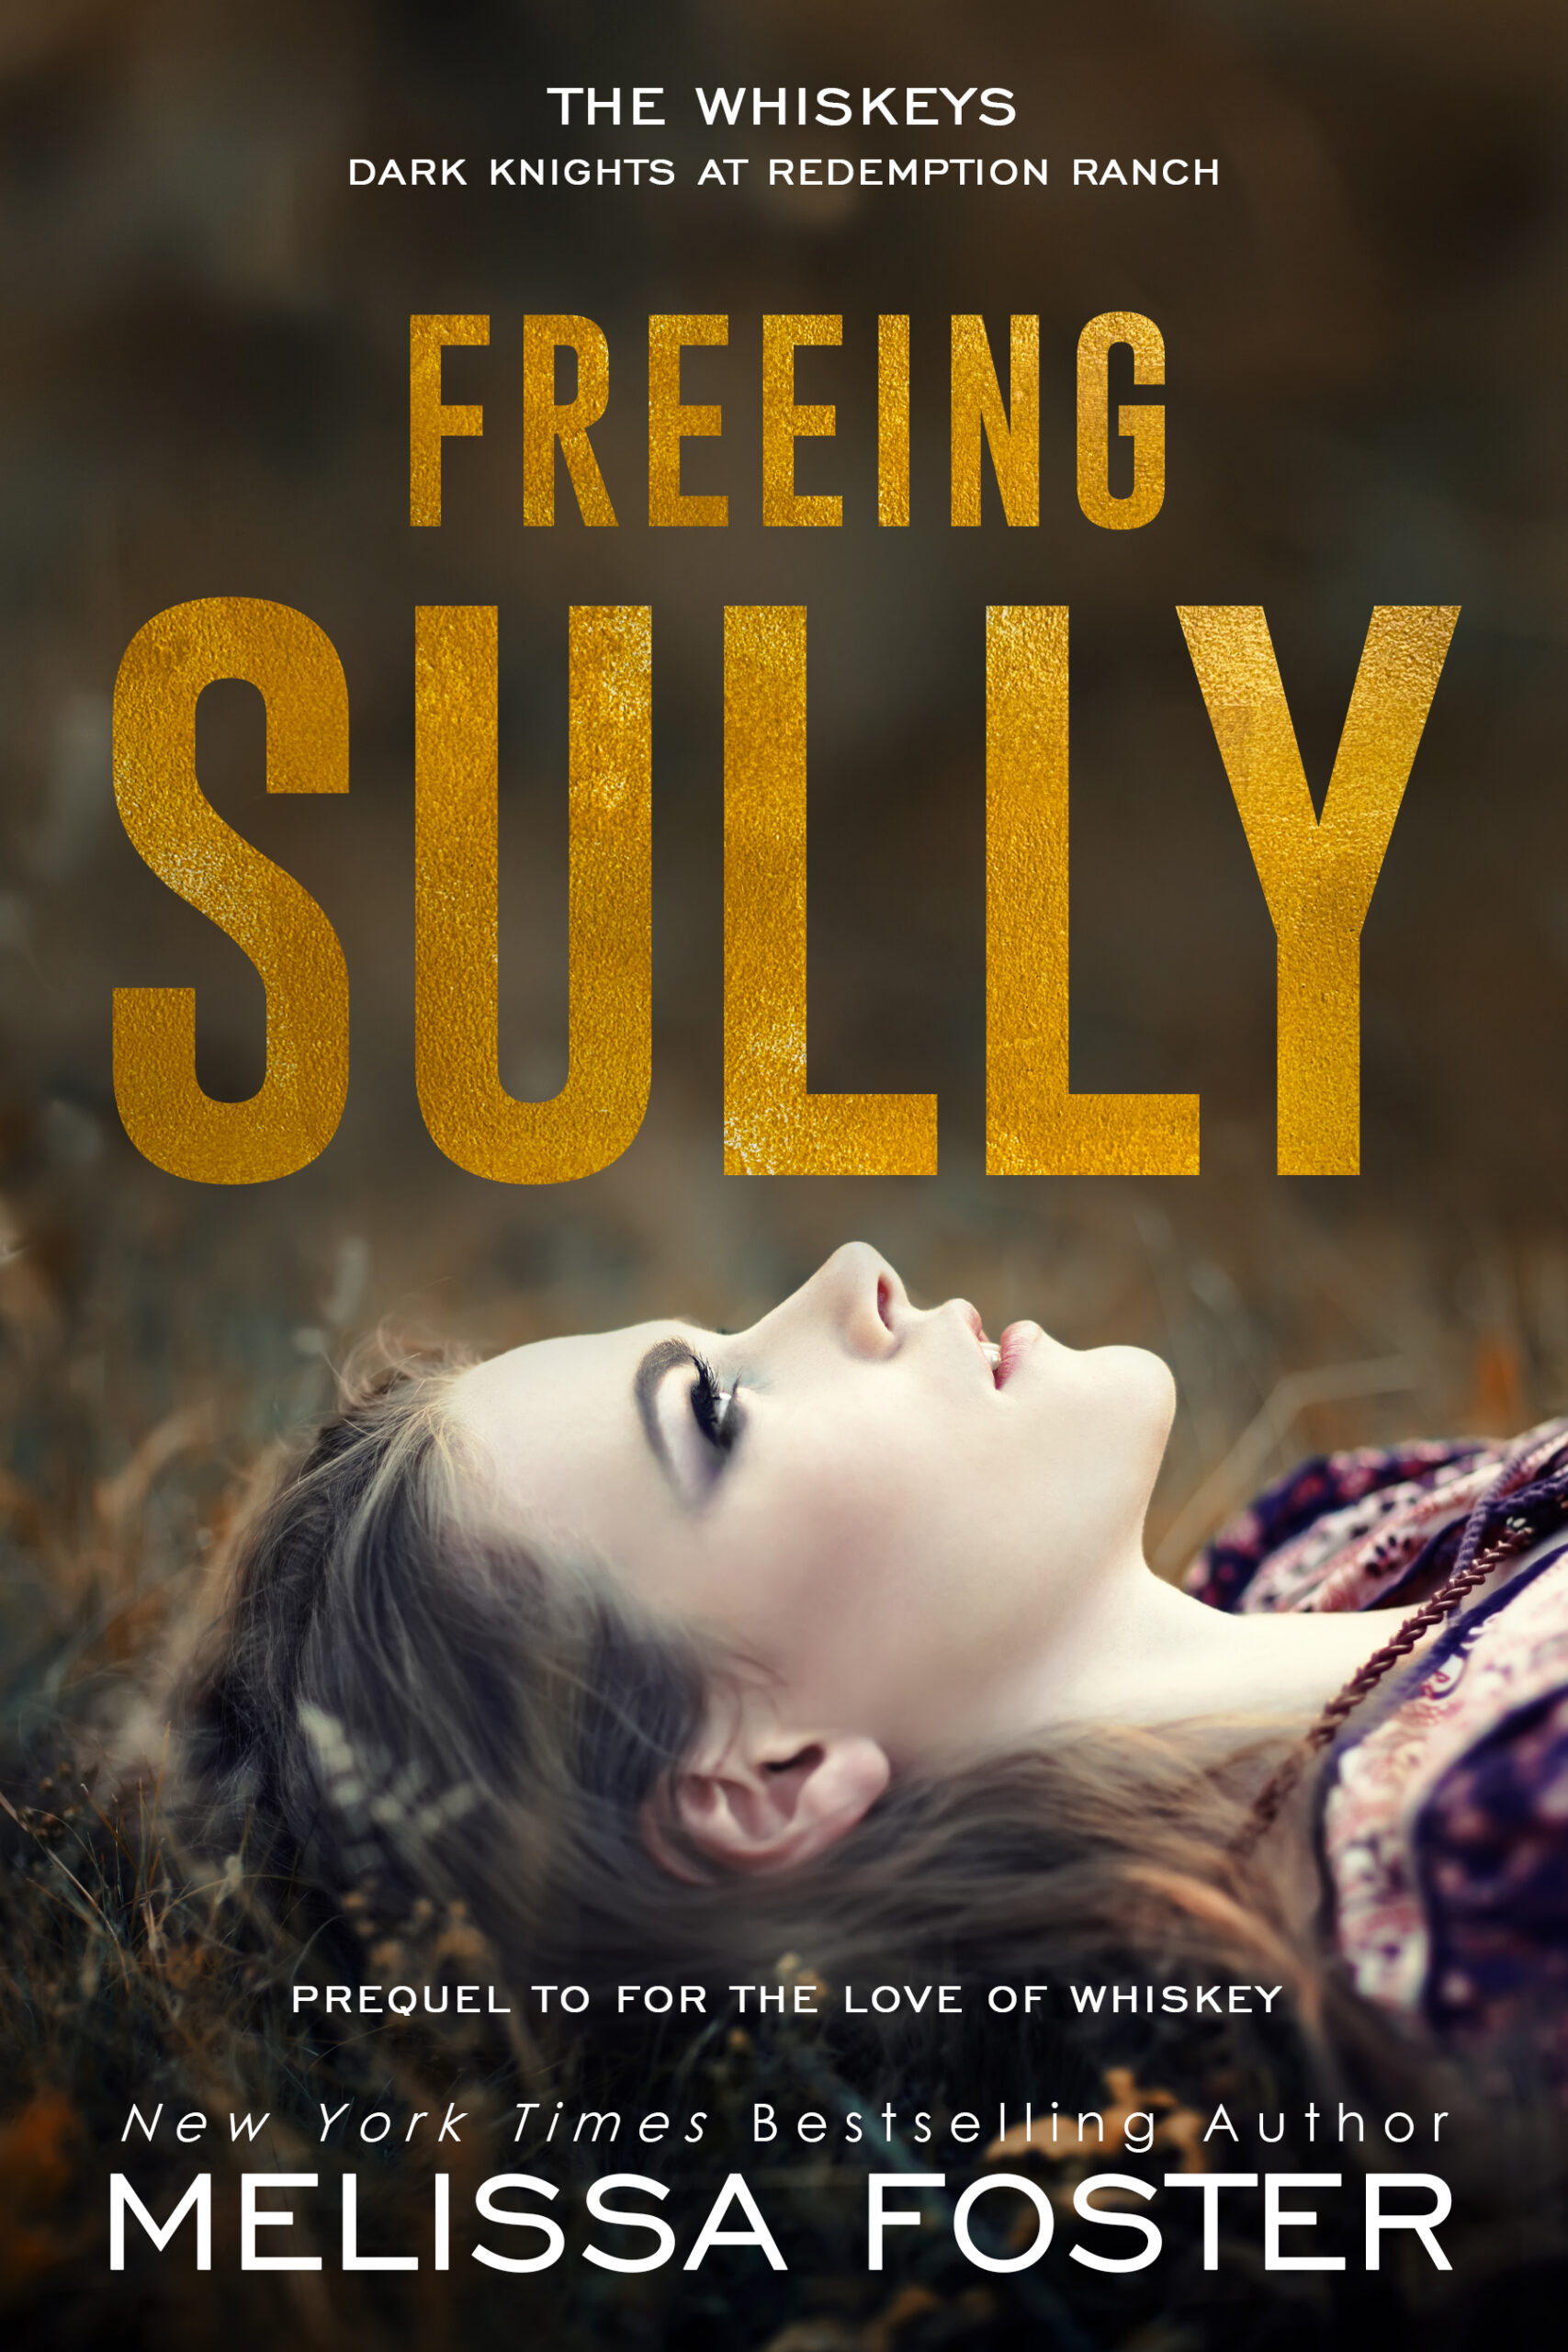 Freeing Sully by Melissa Foster